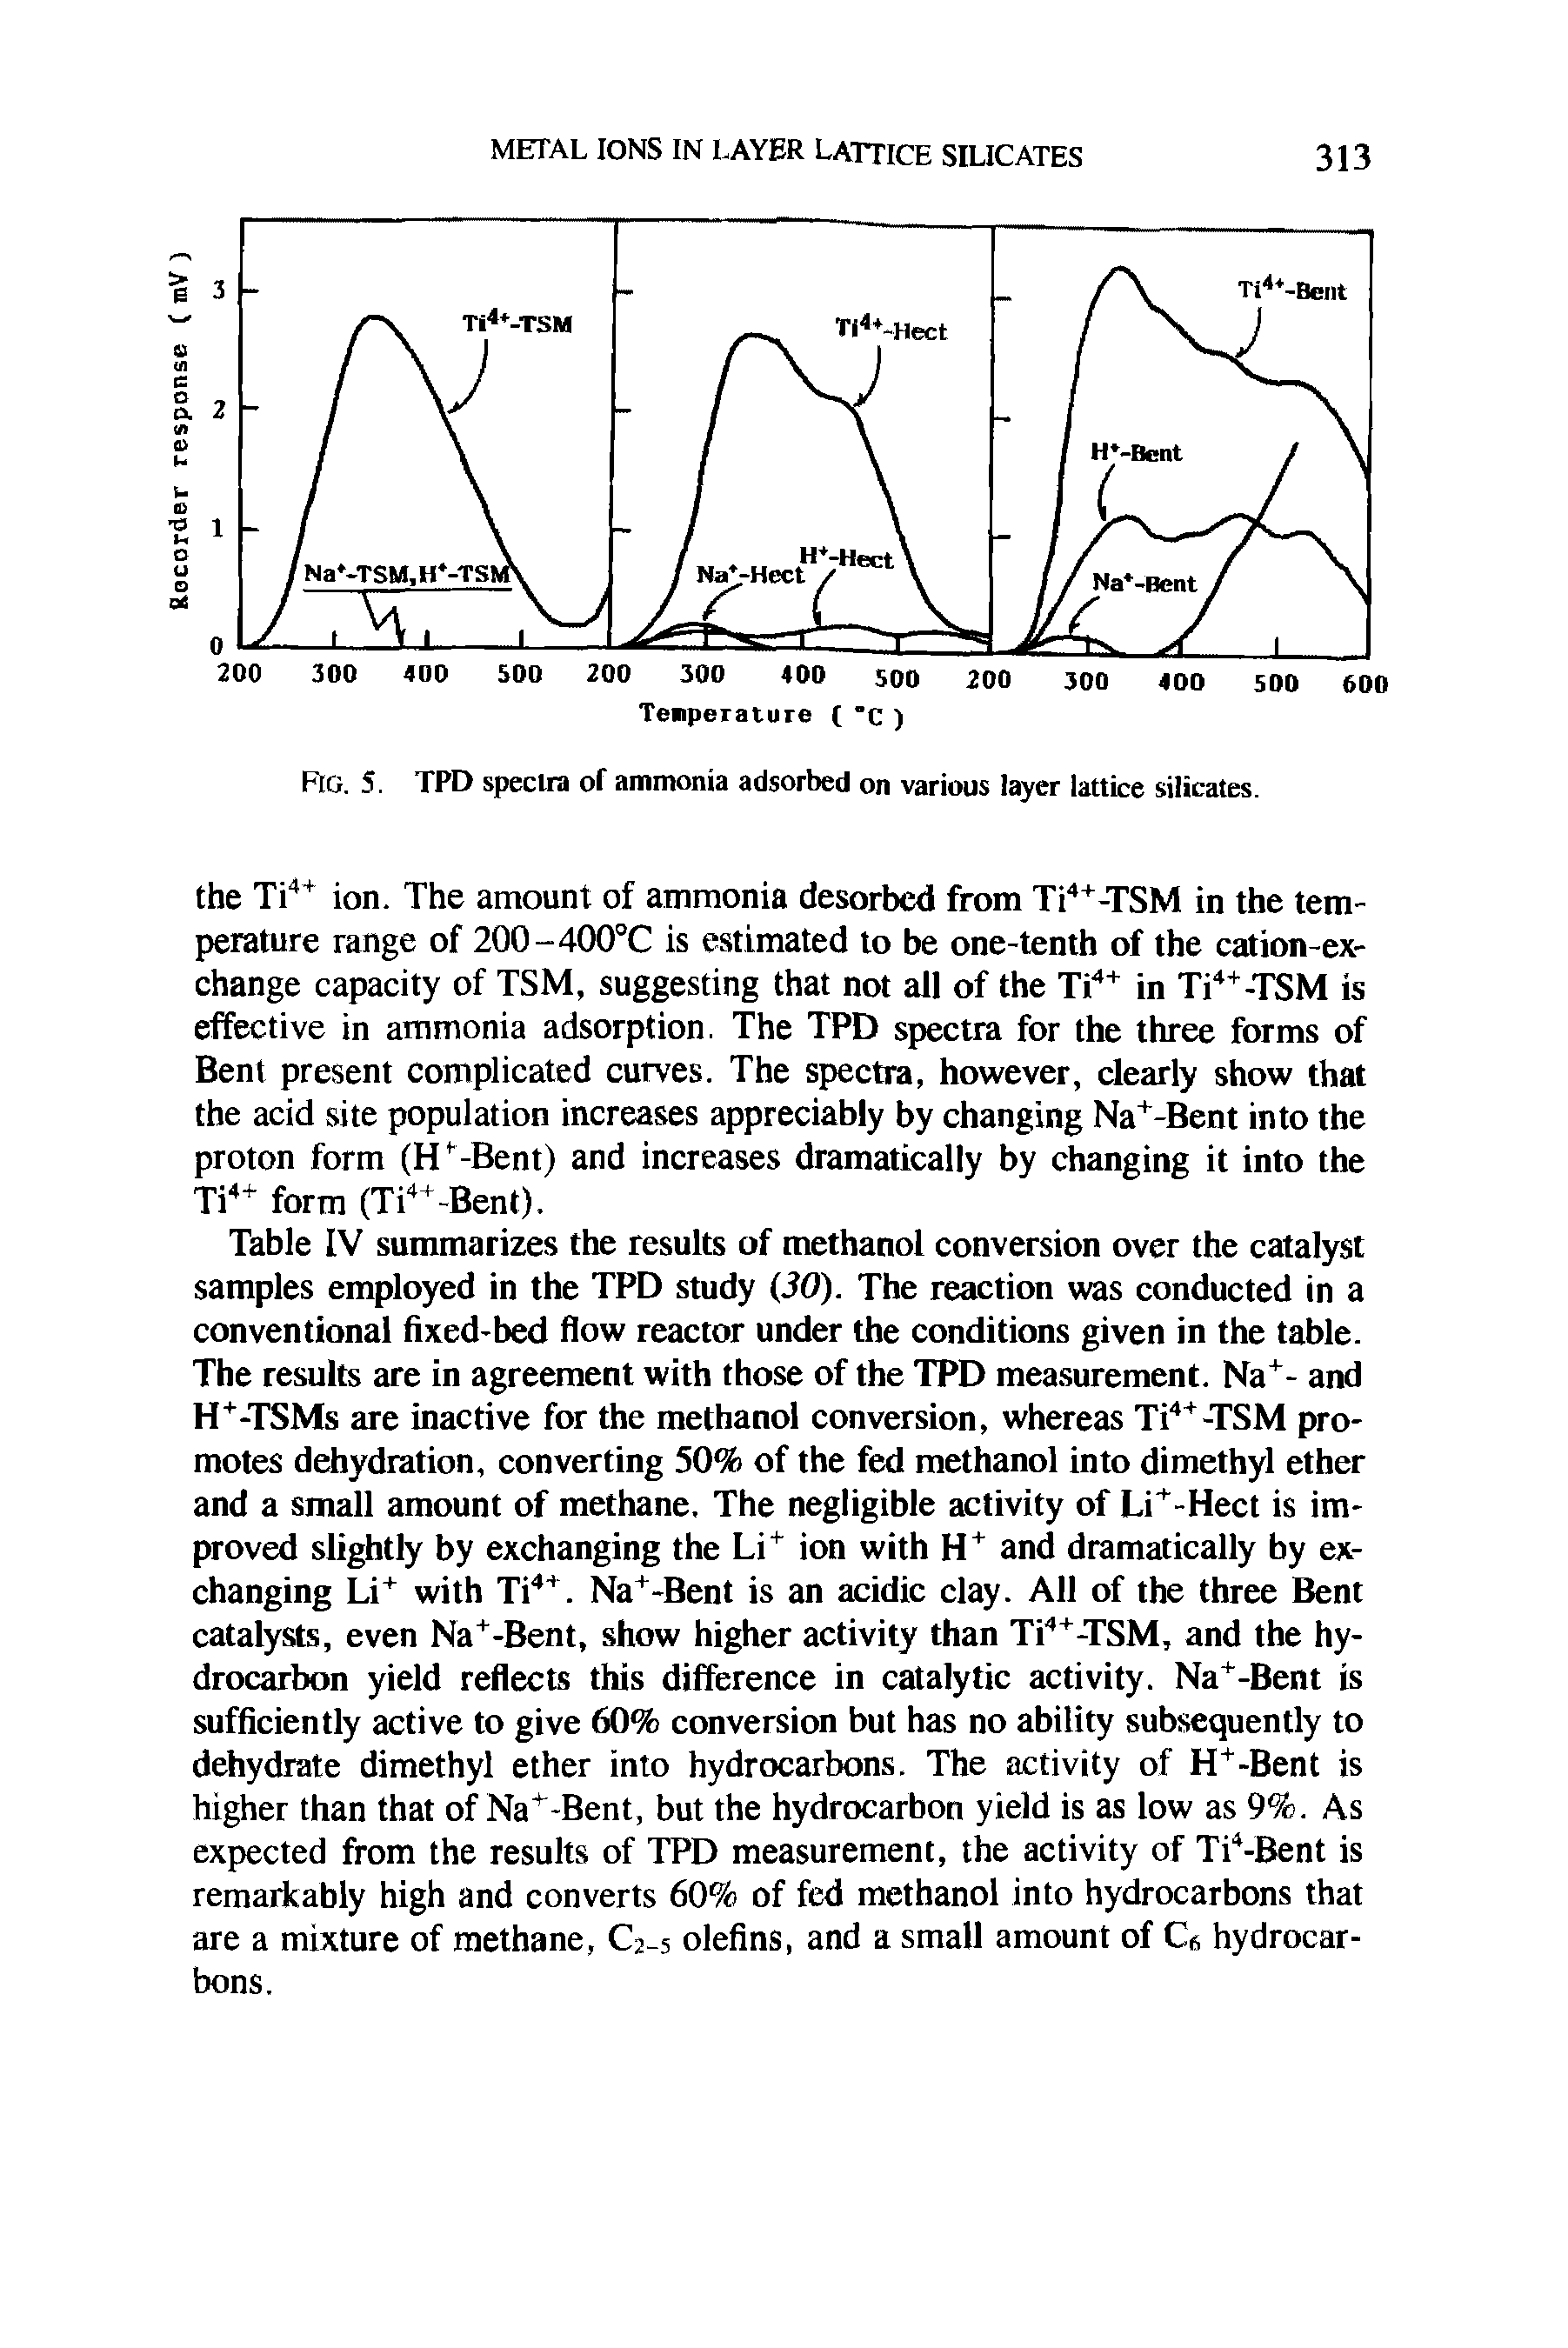 Table IV summarizes the results of methanol conversion over the catalyst samples employed in the TPD study 30). The reaction was conducted in a conventional fixed-bed flow reactor under the conditions given in the table. The results are in agreement with those of the TPD measurement. Na - and H -TSMs are inactive for the methanol conversion, whereas Ti -TSM promotes dehydration, converting 50% of the fed methanol into dimethyl ether and a small amount of methane. The negligible activity of Li -Hect is improved slightly by exchanging the Li ion with and dramatically by exchanging Li with Ti. Na -Bent is an acidic clay. All of the three Bent catalysts, even Na -Bent, show higher activity than Ti -TSM, and the hydrocarbon yield reflects this difference in catalytic activity. Na -Bent is sufficiently active to give 60% conversion but has no ability subsequently to dehydrate dimethyl ether into hydrocarbons. The activity of H -Bent is higher than that of Na" -Bent, but the hydrocarbon yield is as low as 9%. As expected from the results of TPD measurement, the activity of Ti -Bent is remarkably high and converts 60% of fed methanol into hydrocarbons that are a mixture of methane, C2-5 olefins, and a small amount of Cs hydrocarbons.